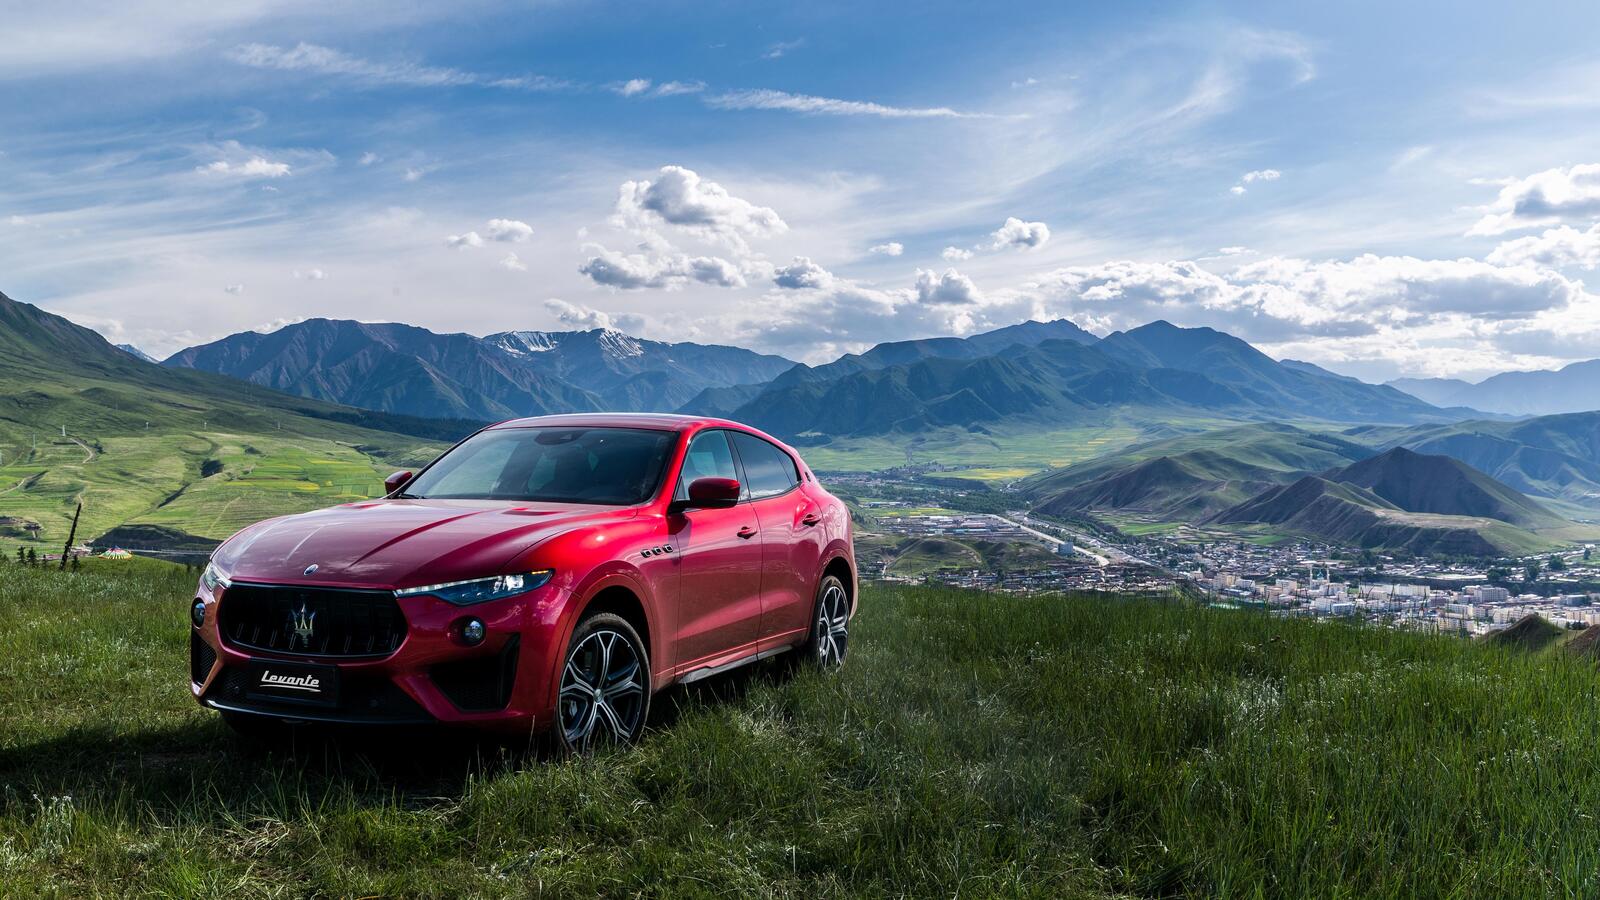 Free photo A red Maserati levante against the mountains.